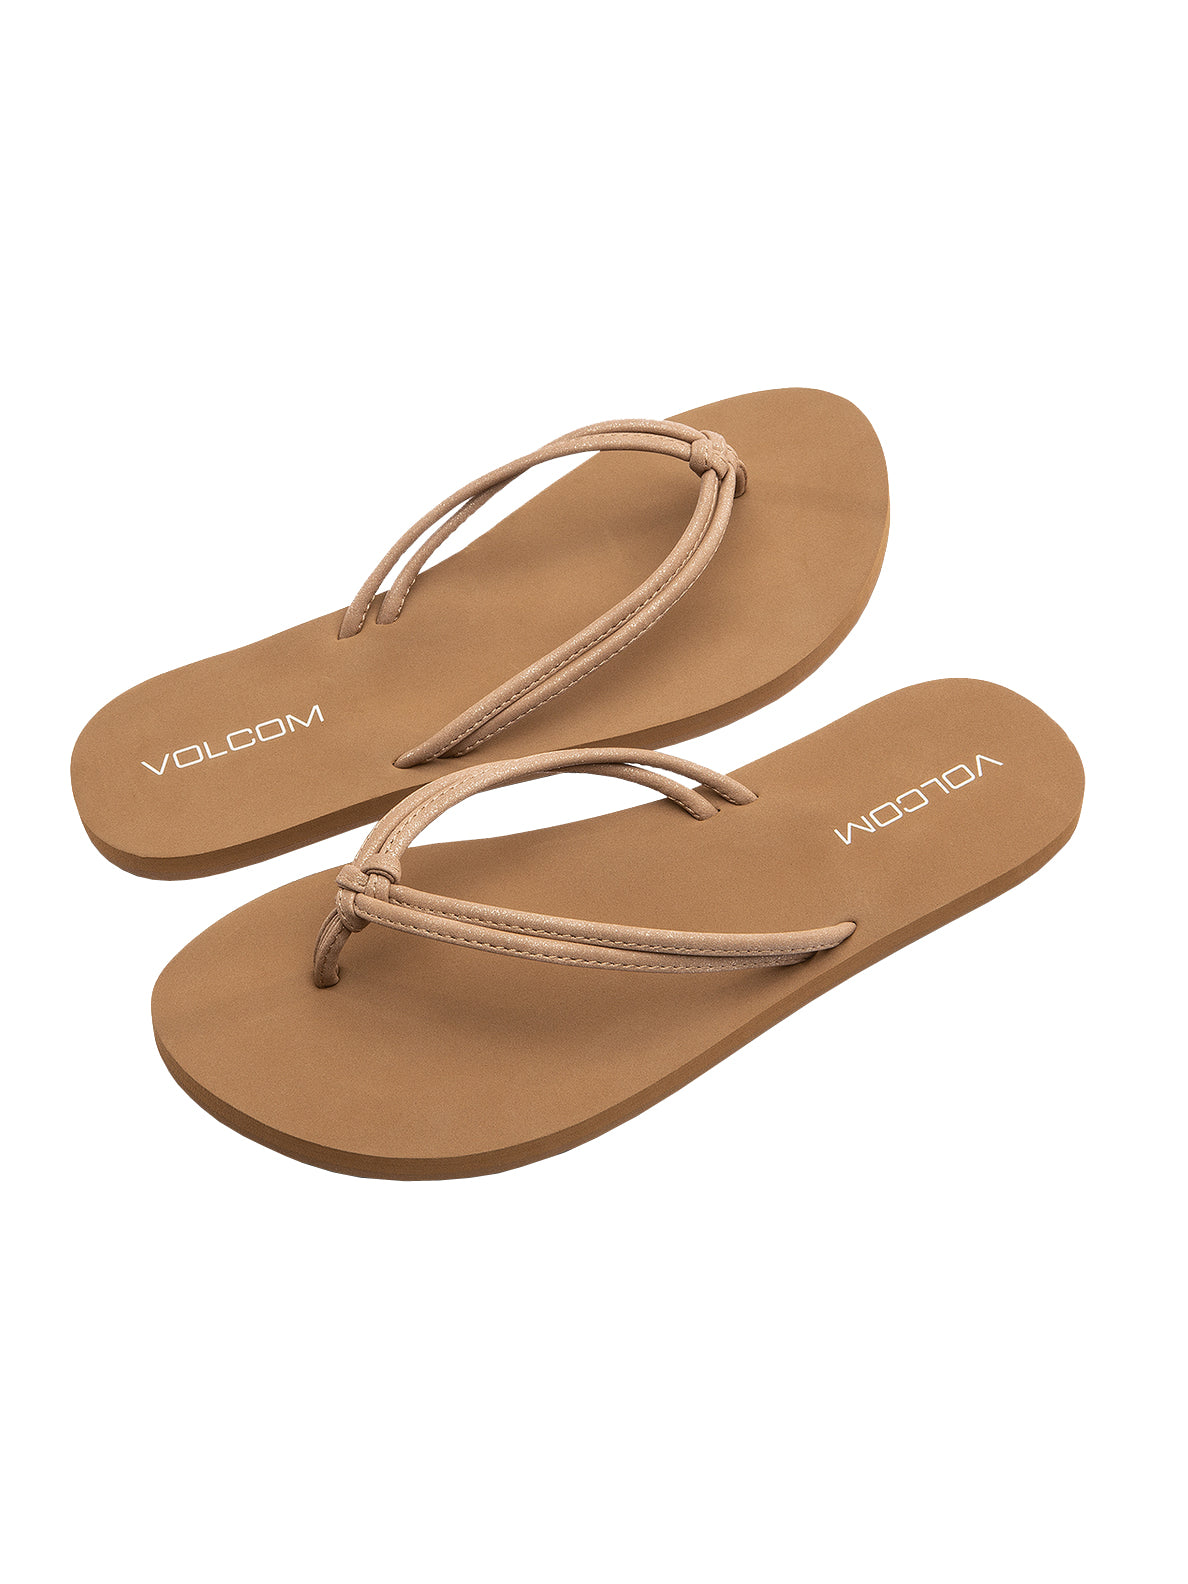 Volcom Forever and Ever 2 Womens Sandal TAN23-Tan 8